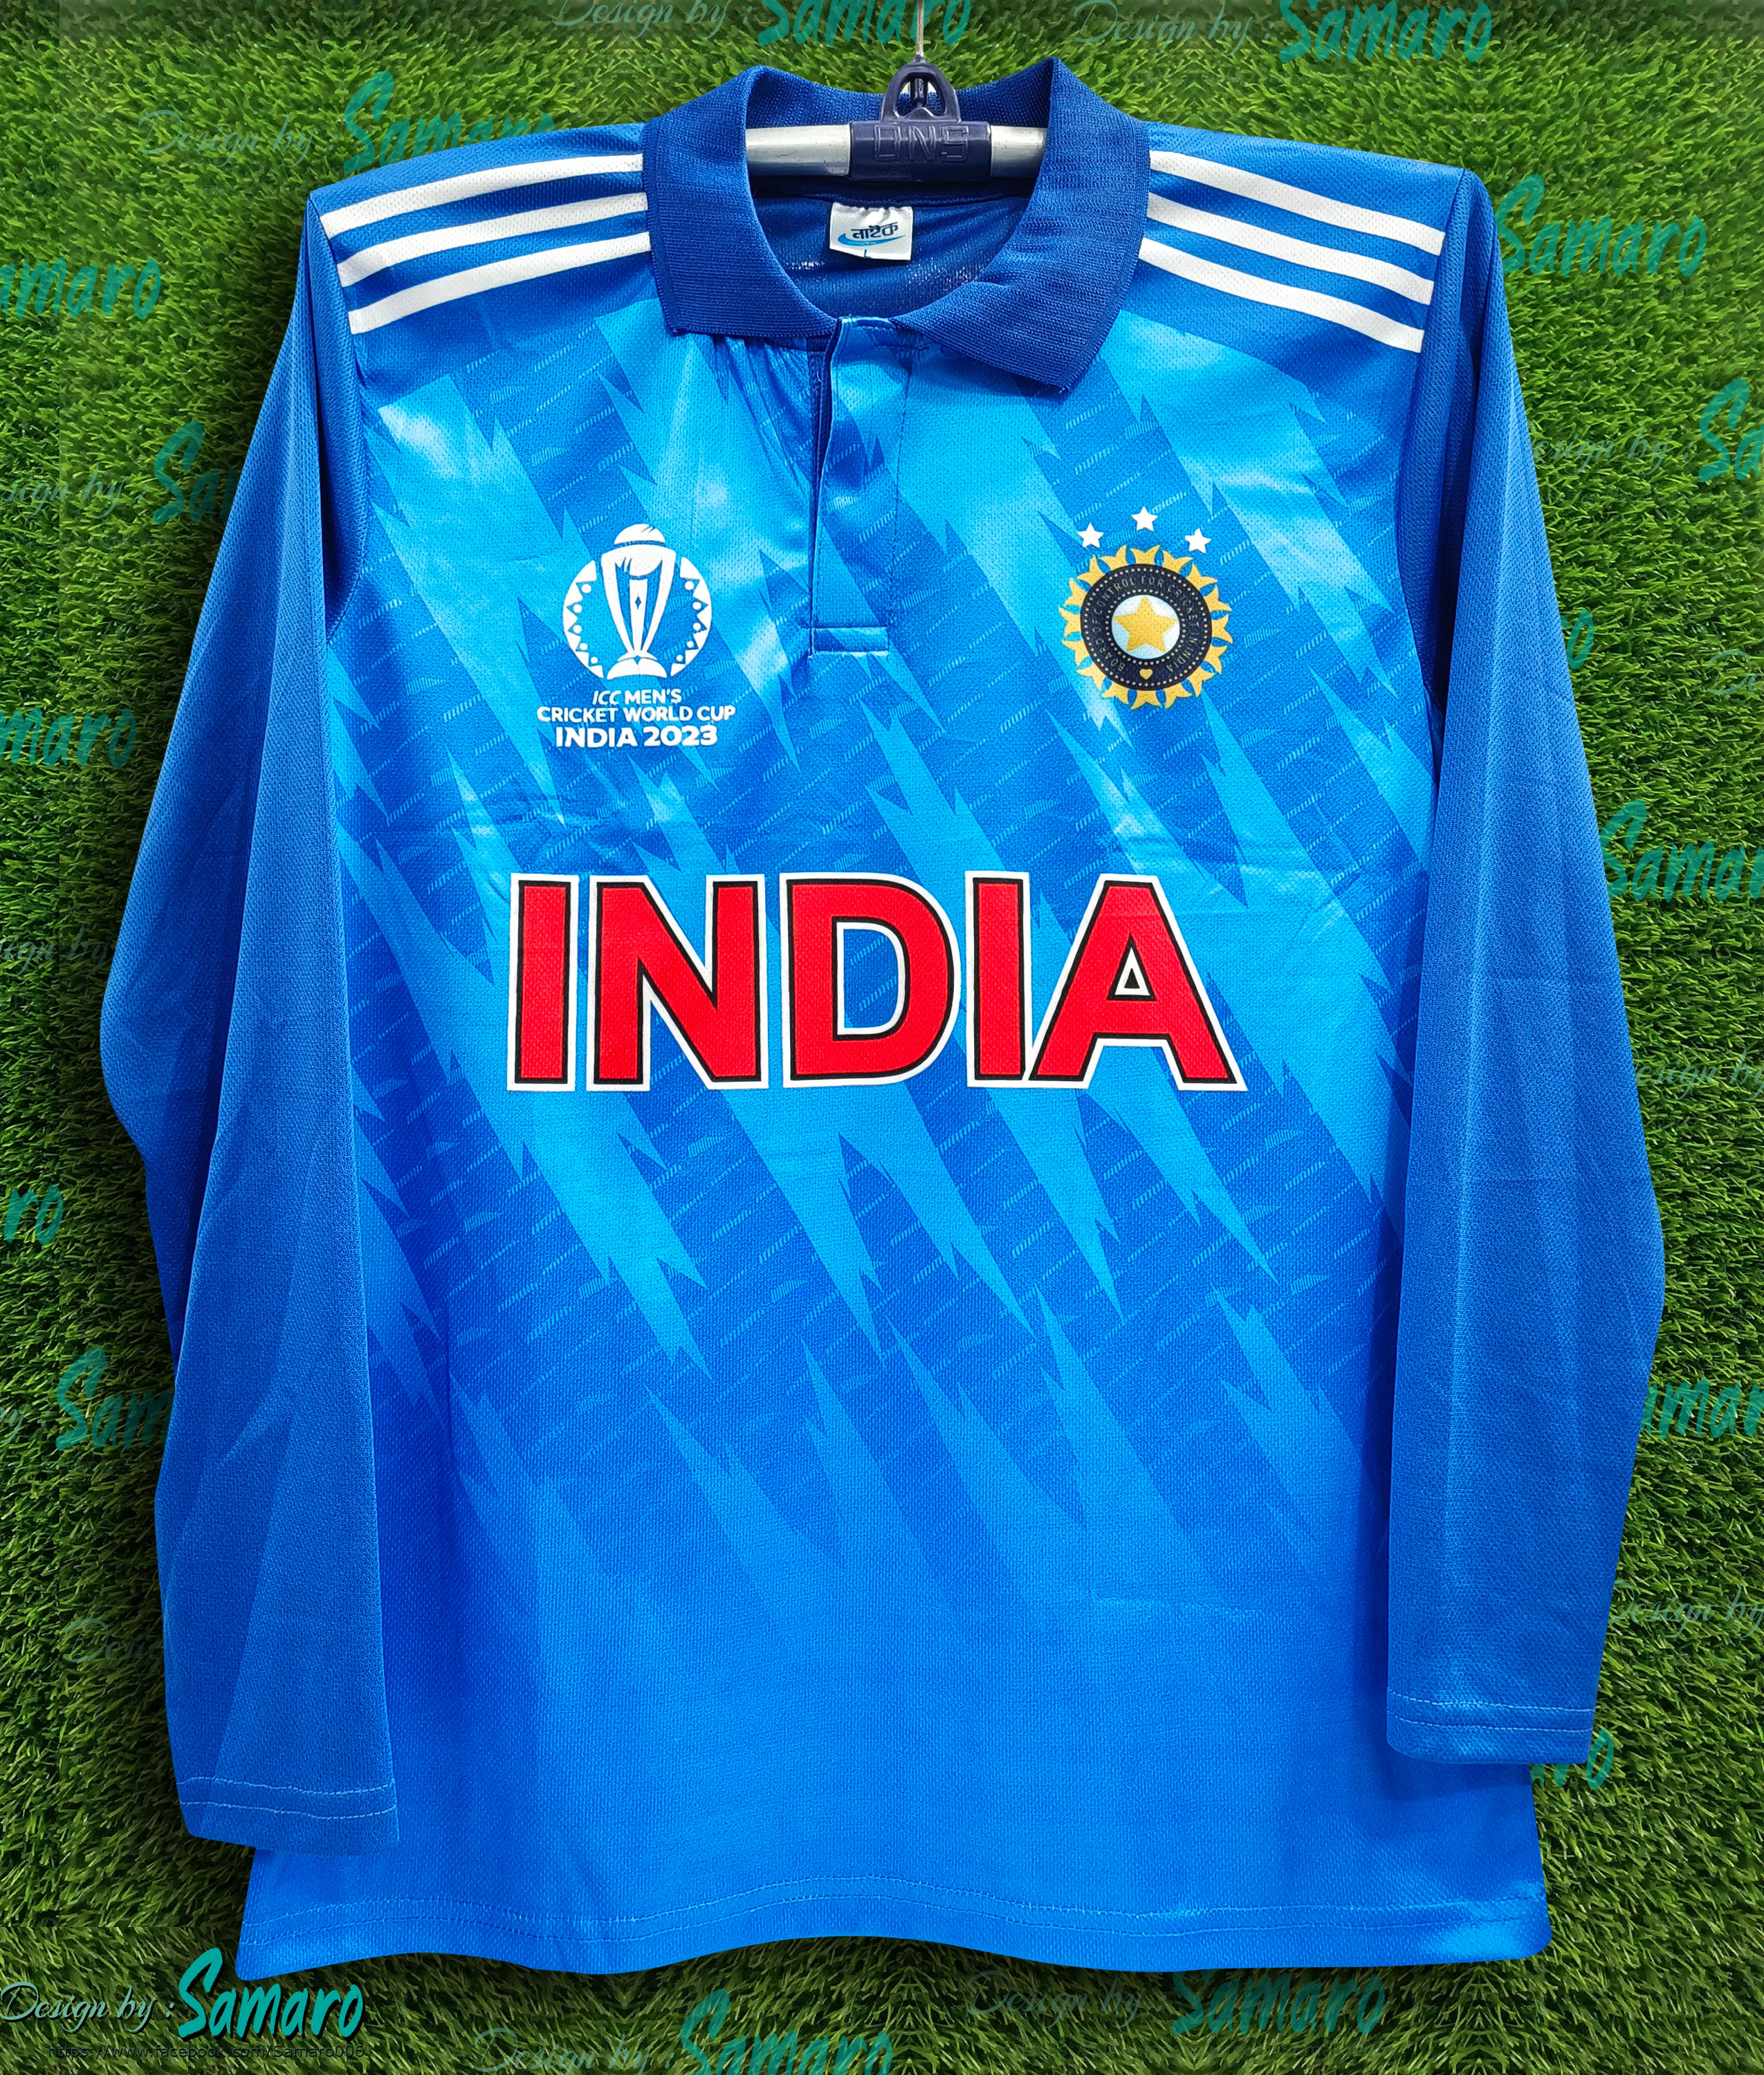  Whitedot Bangladesh Replica T20 World Cup Jersey 2021-100%  Dryfit Moisture Management Polyester : Clothing, Shoes & Jewelry